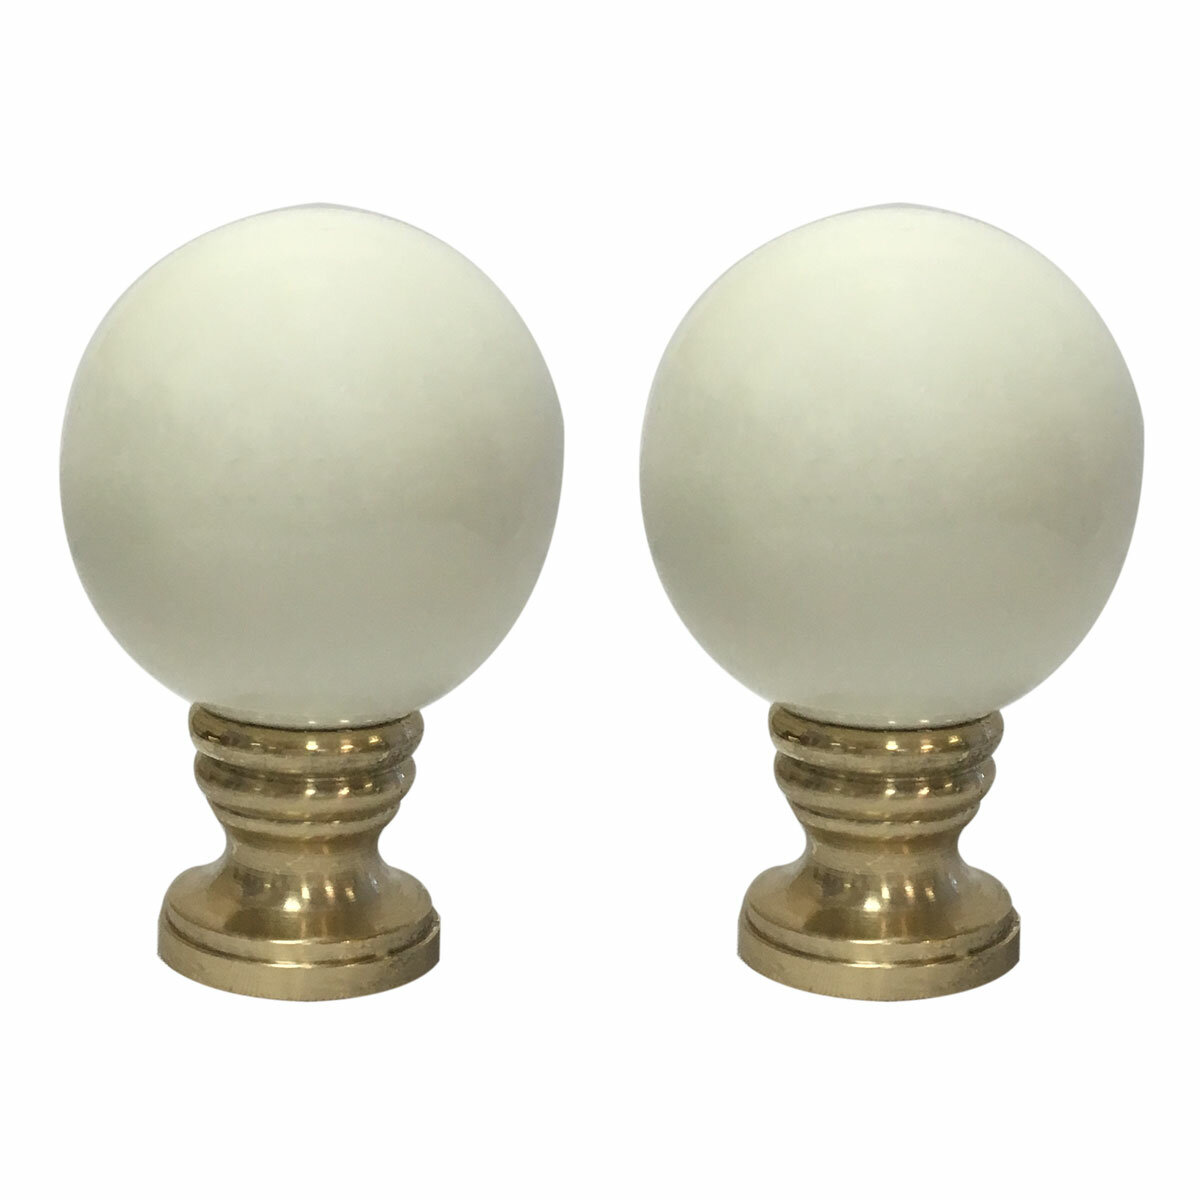 Lamp Finial Natural Bone Asian Character Ball Sphere with Graphic Design 2A17 